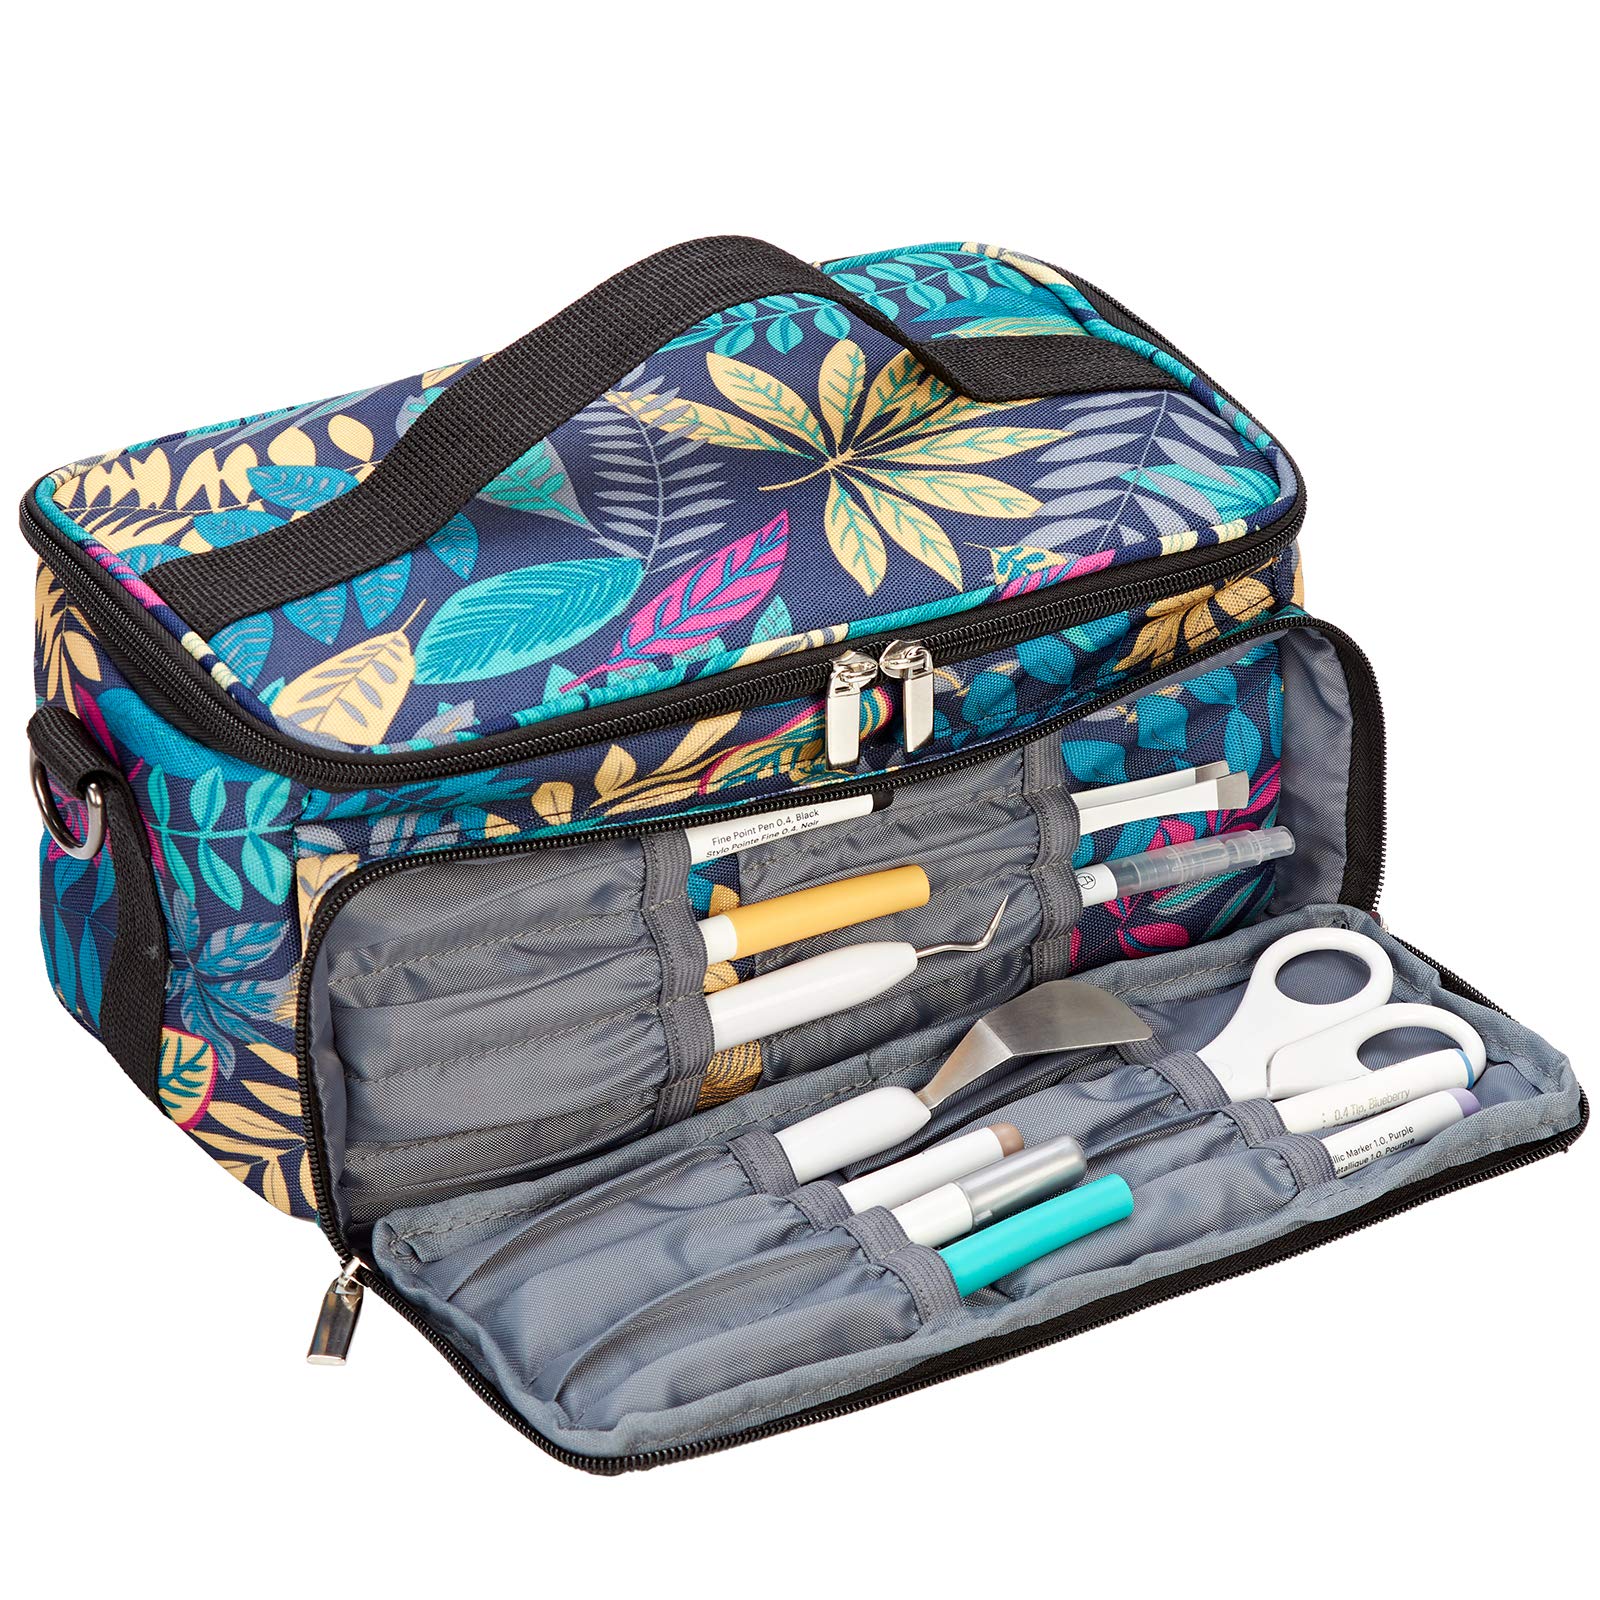 HOMEST Carrying Case for Cricut Joy, Lightweight Travel Tote Bag for Cricut Joy and Tool Set, Multiple Pockets for Accessories and Supplies Storage, Floral